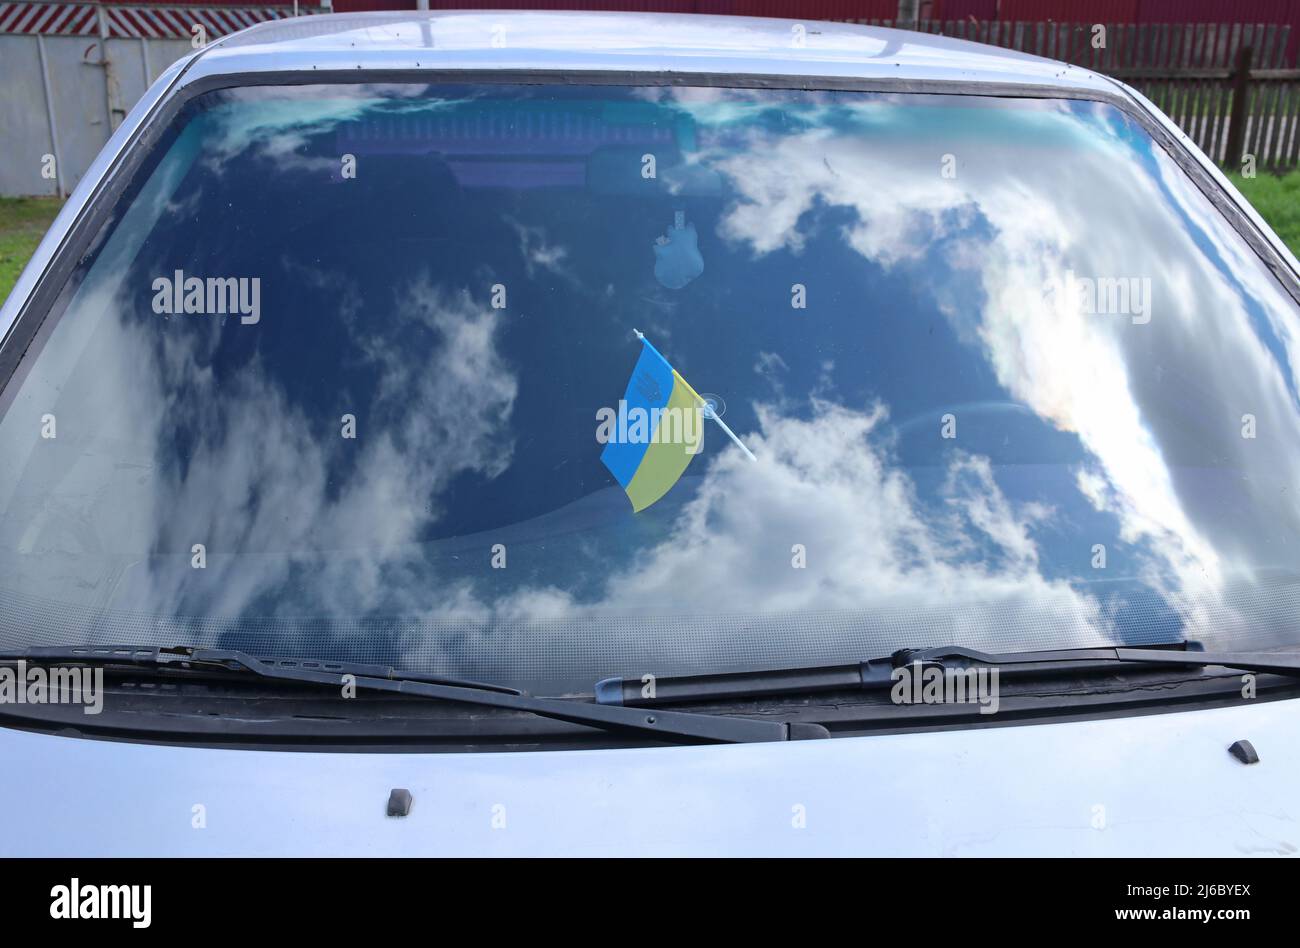 The Ukrainian flag is affixed to the windshield of a car. Reflected sky with clouds. Stock Photo